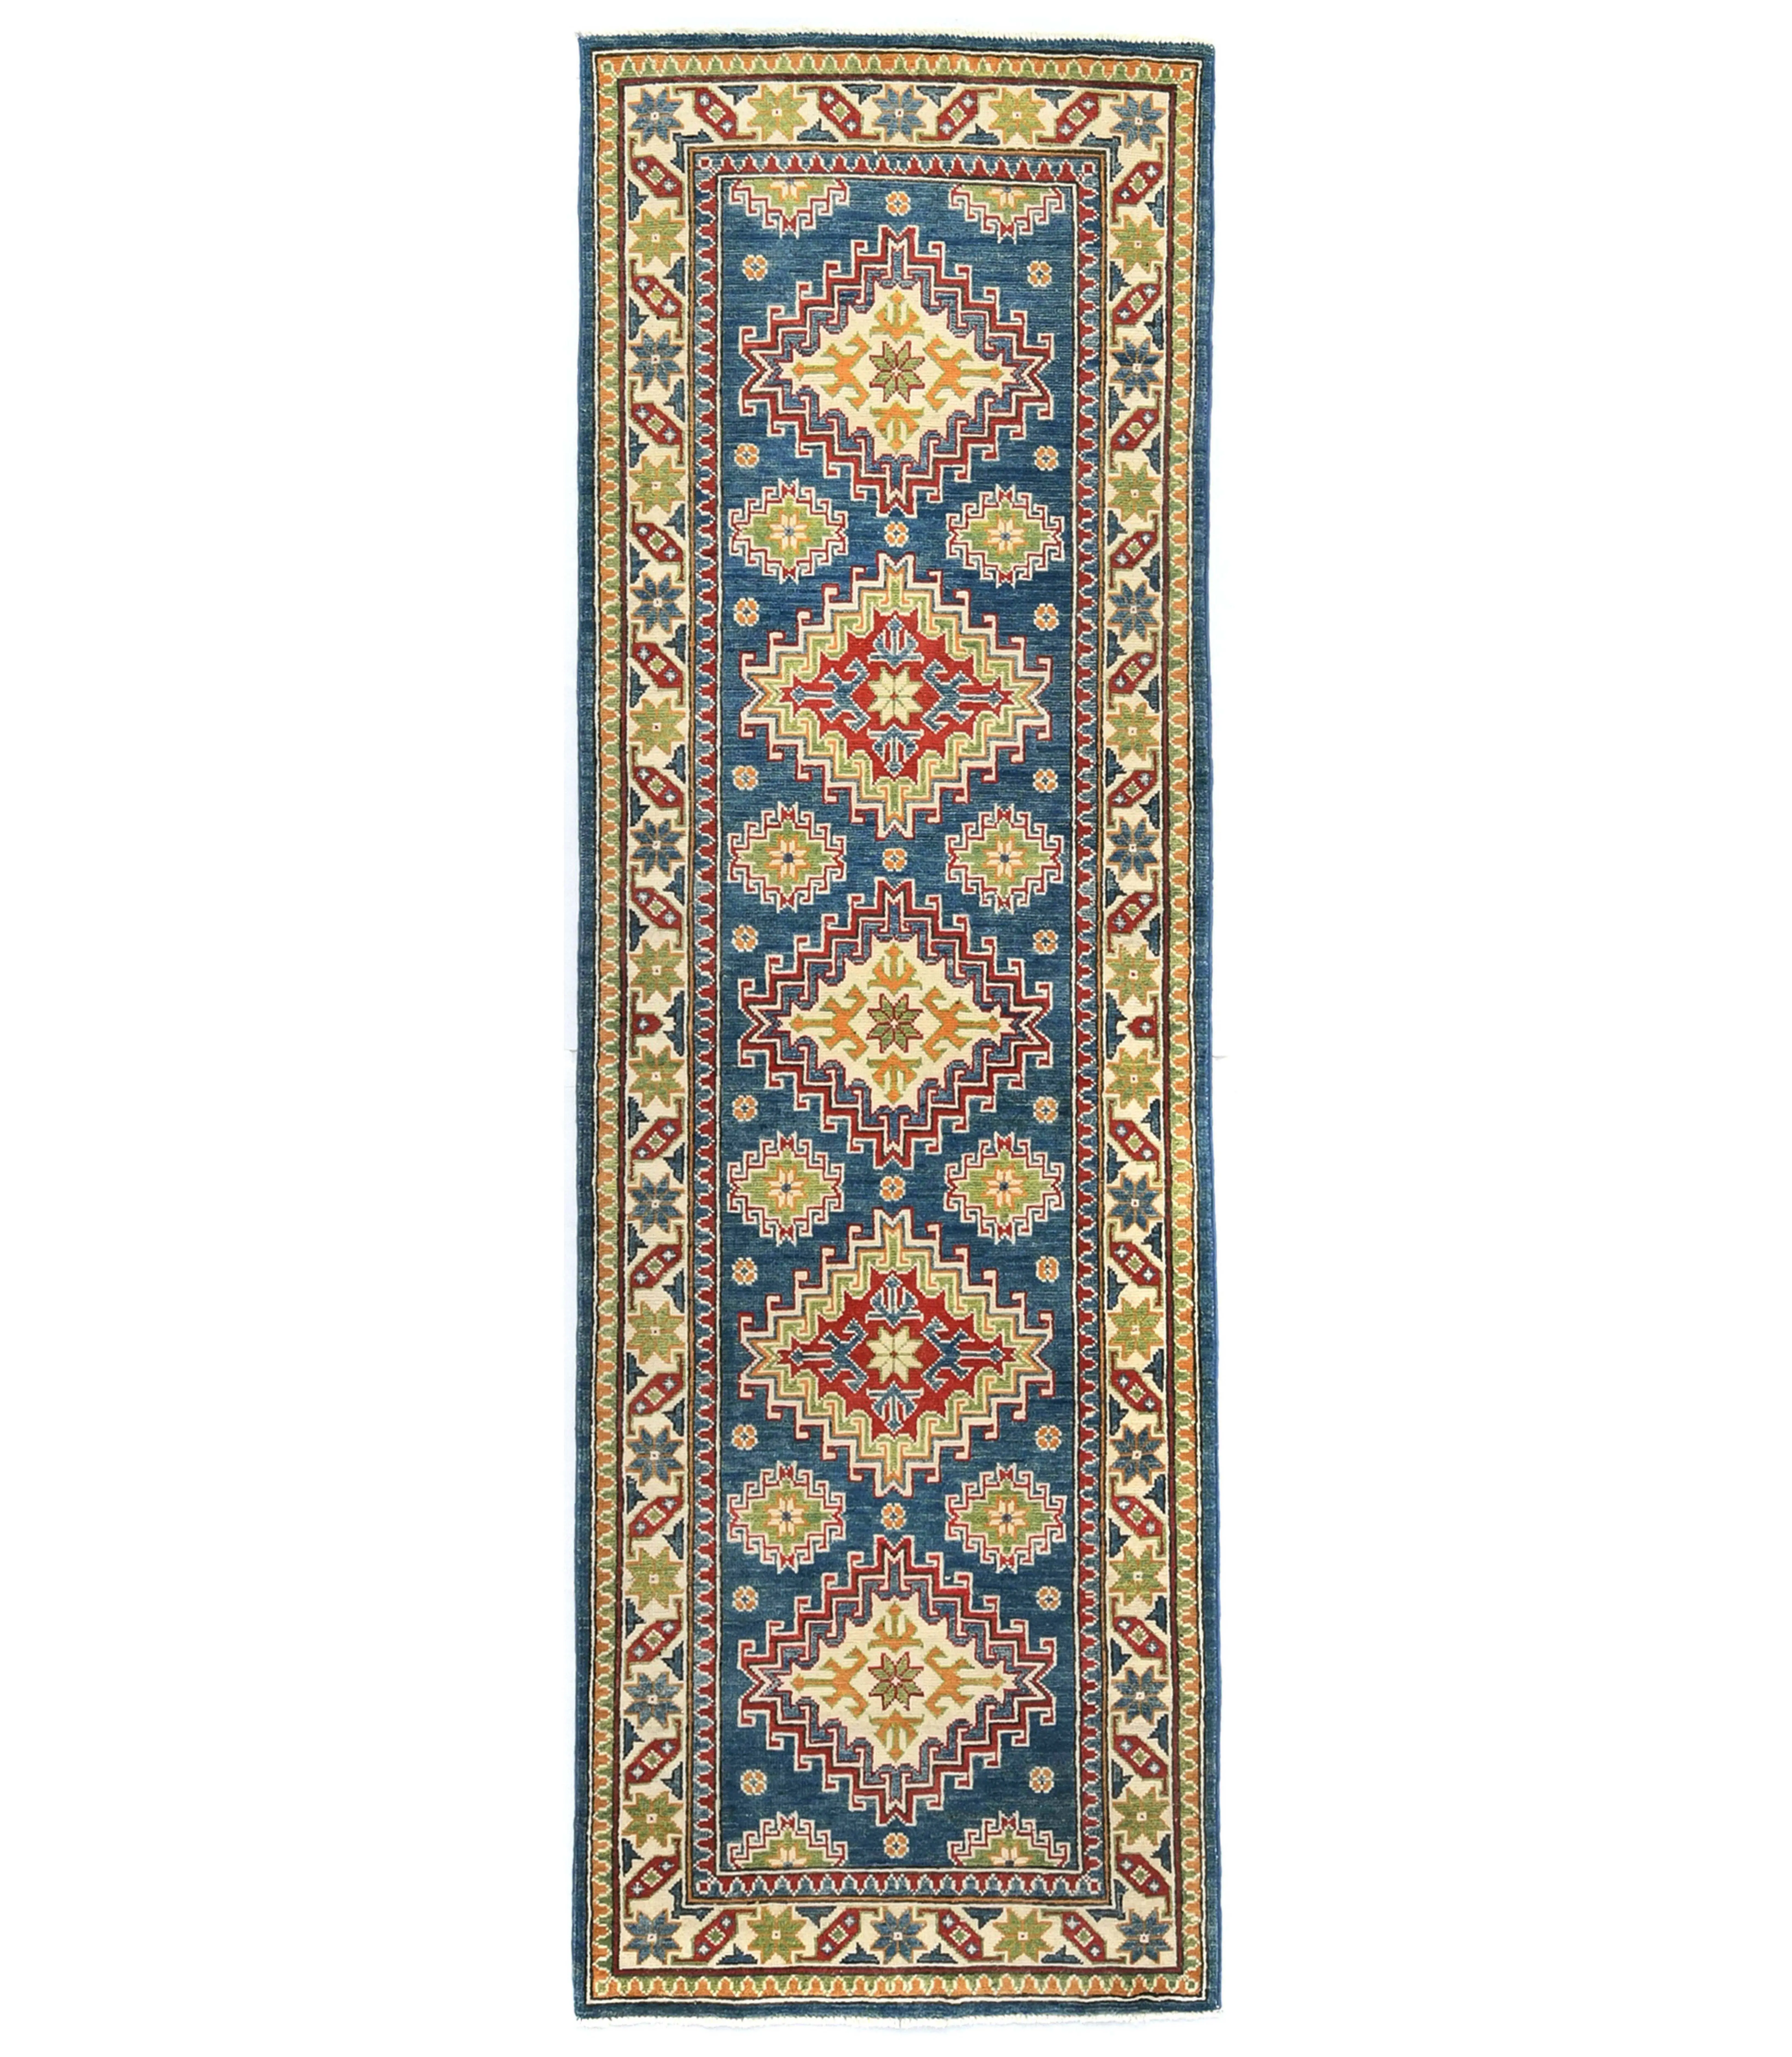 Indian Tibetan Multicolor Rectangle 6x9 ft Wool and Silk Carpet